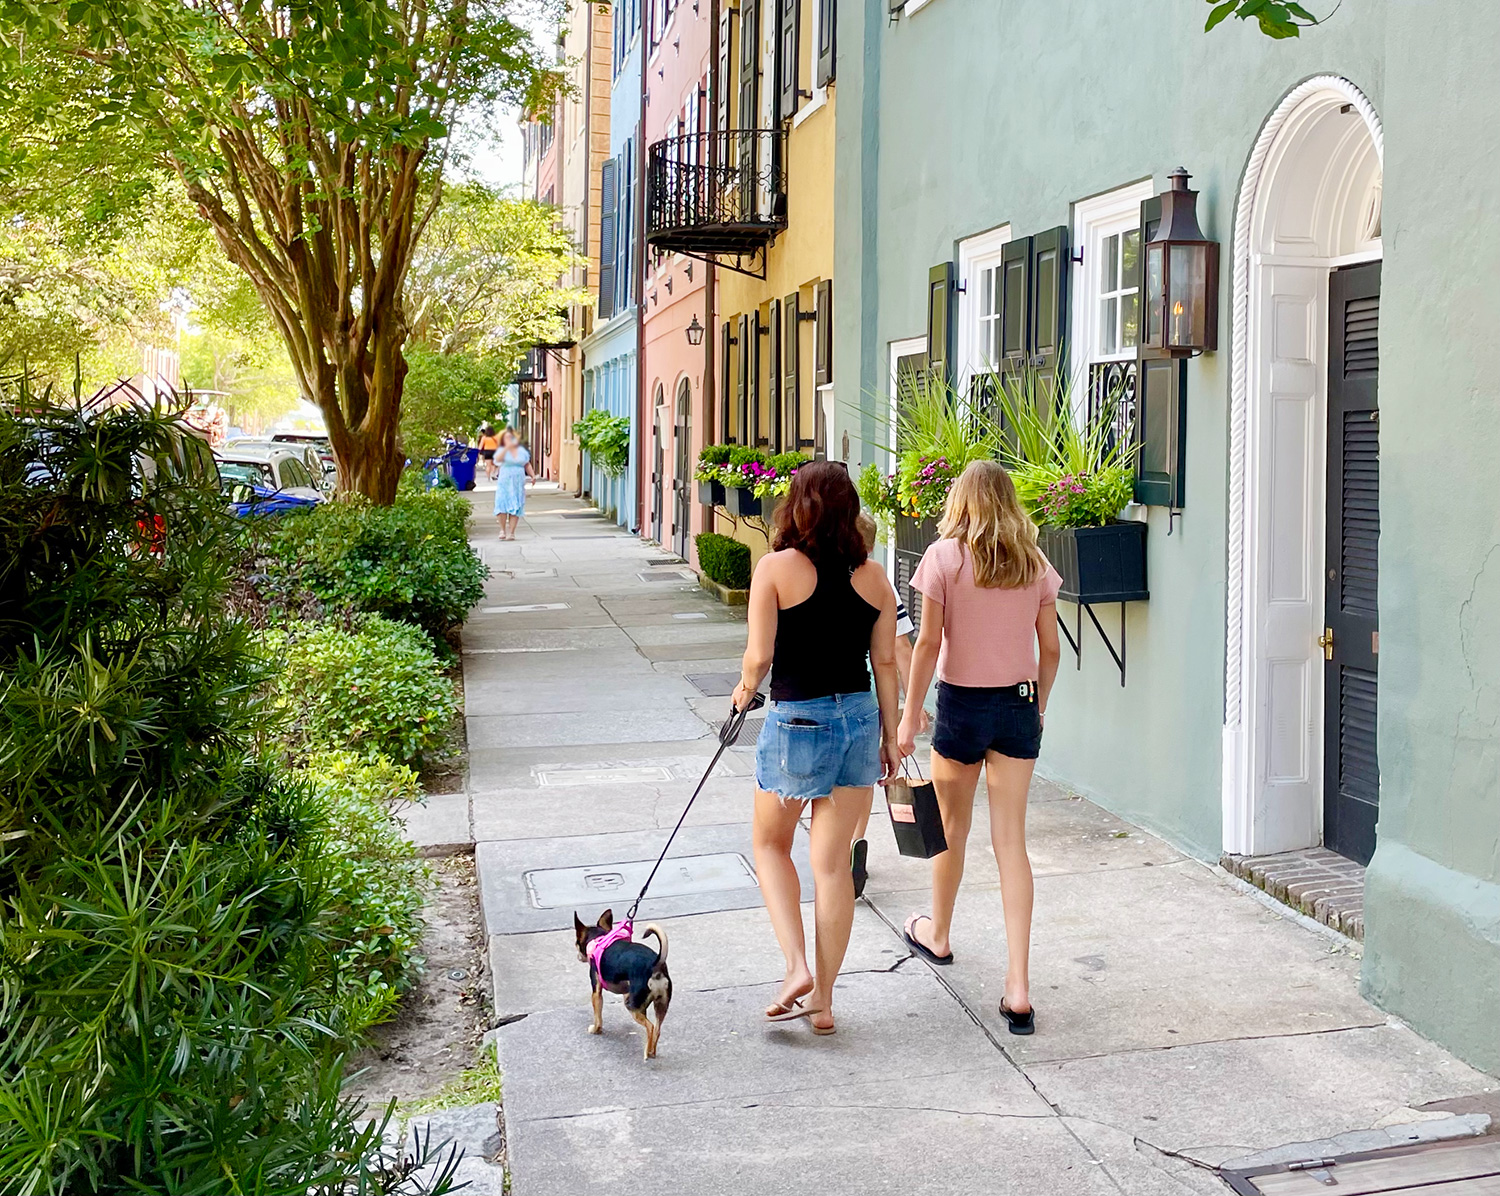 Best Things to Do in Charleston with City Experiences